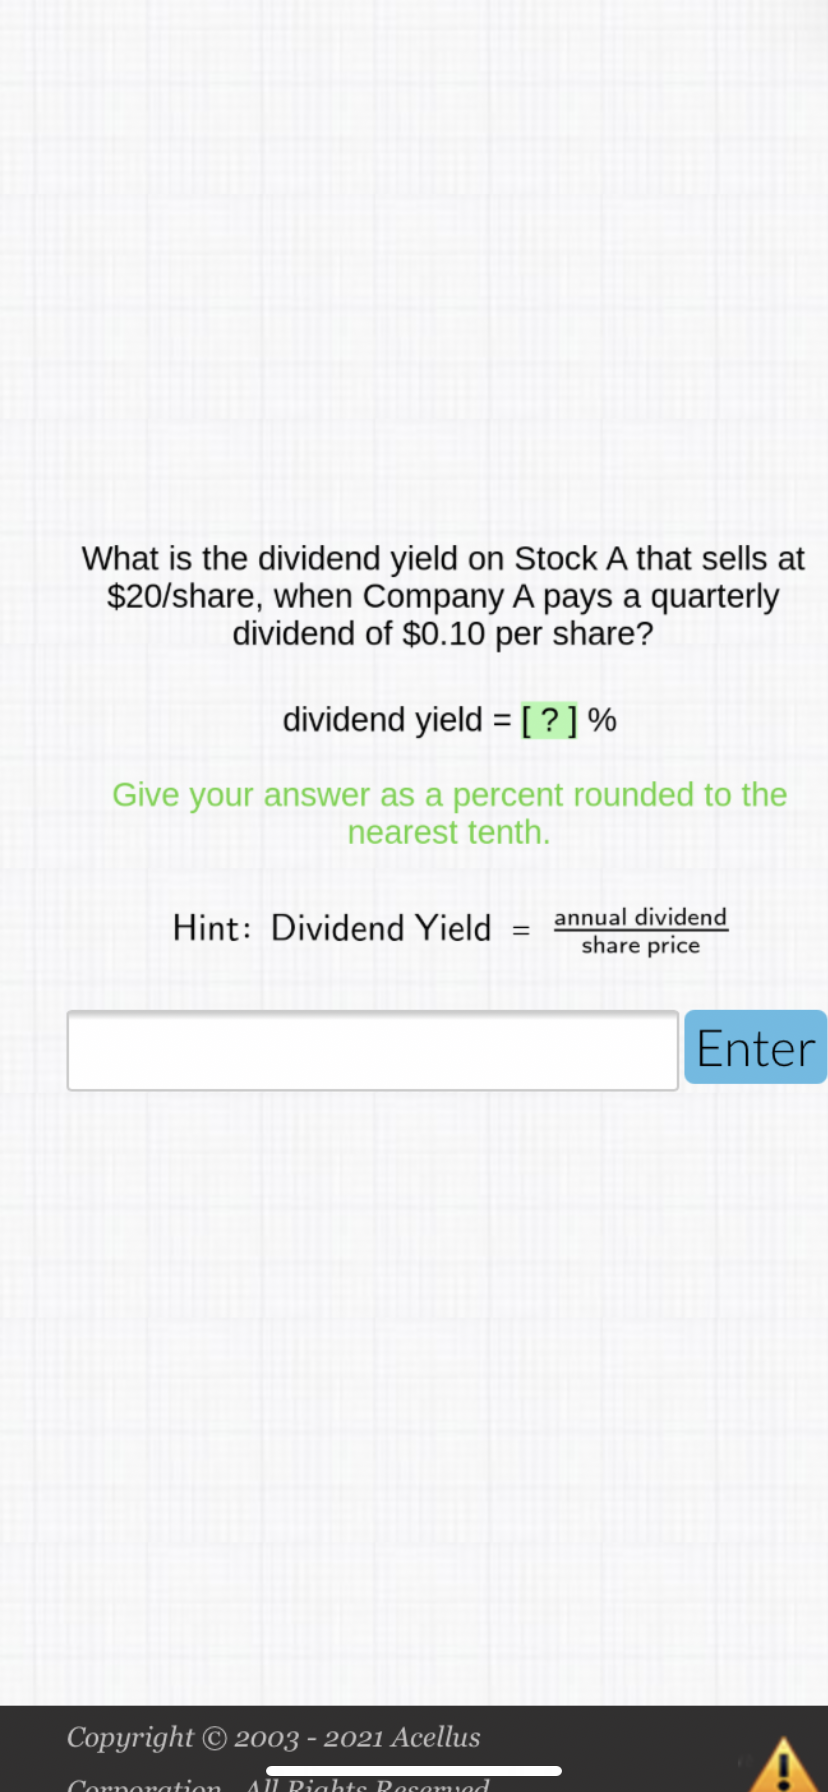 What is the dividend yield on Stock A that sells at
$20/share, when Company A pays a quarterly
dividend of $0.10 per share?
dividend yield = [?]%
Give your answer as a percent rounded to the
nearest tenth.
annual dividend
Hint: Dividend Yield
%3D
share price
Enter
Copyright © 2003 - 2021 Acellus
Corno ation
AU Riahts Rosamved
